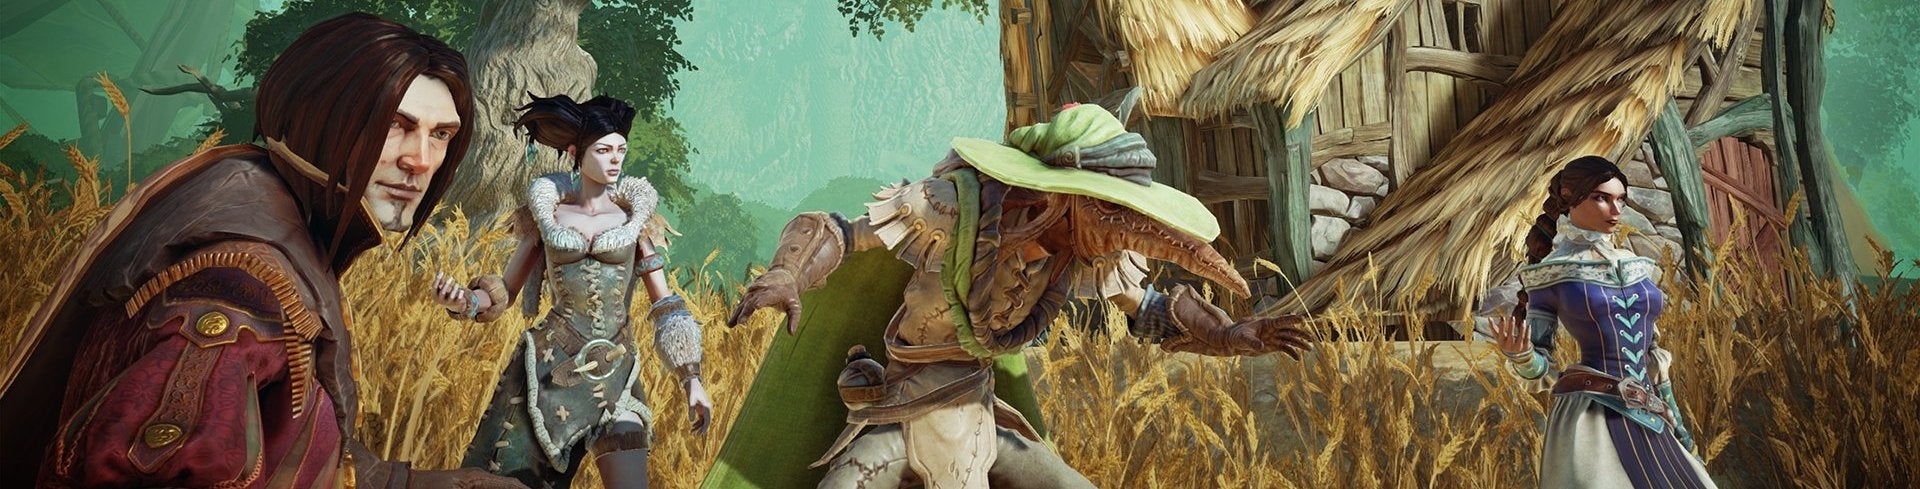 Image for Fable Legends is free-to-play